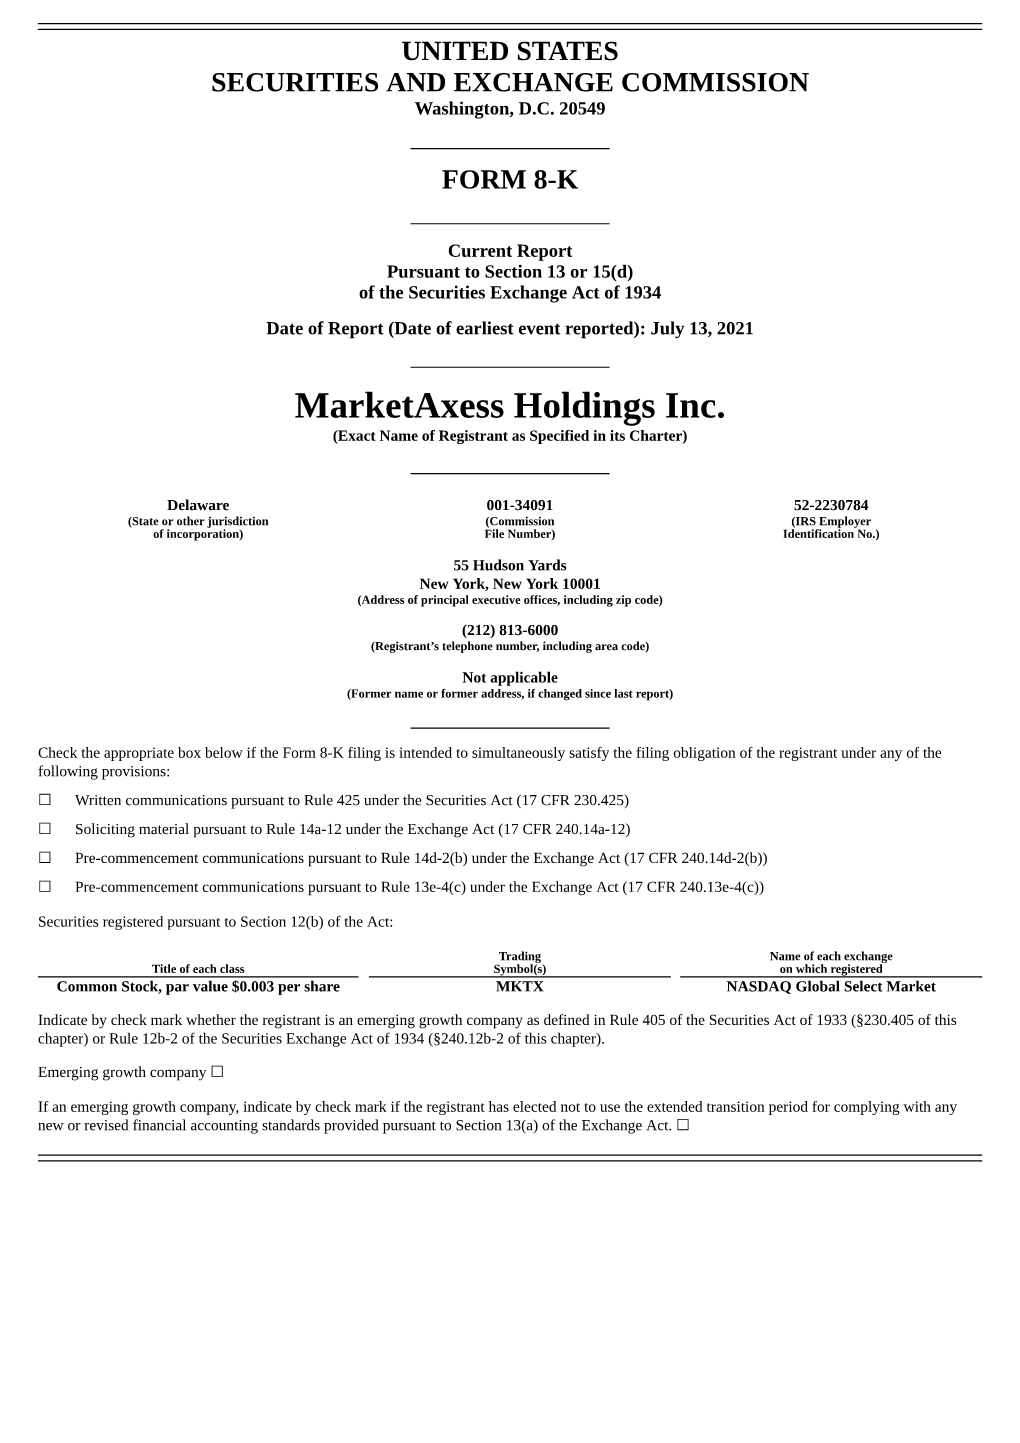 Marketaxess Holdings Inc. (Exact Name of Registrant As Specified in Its Charter)